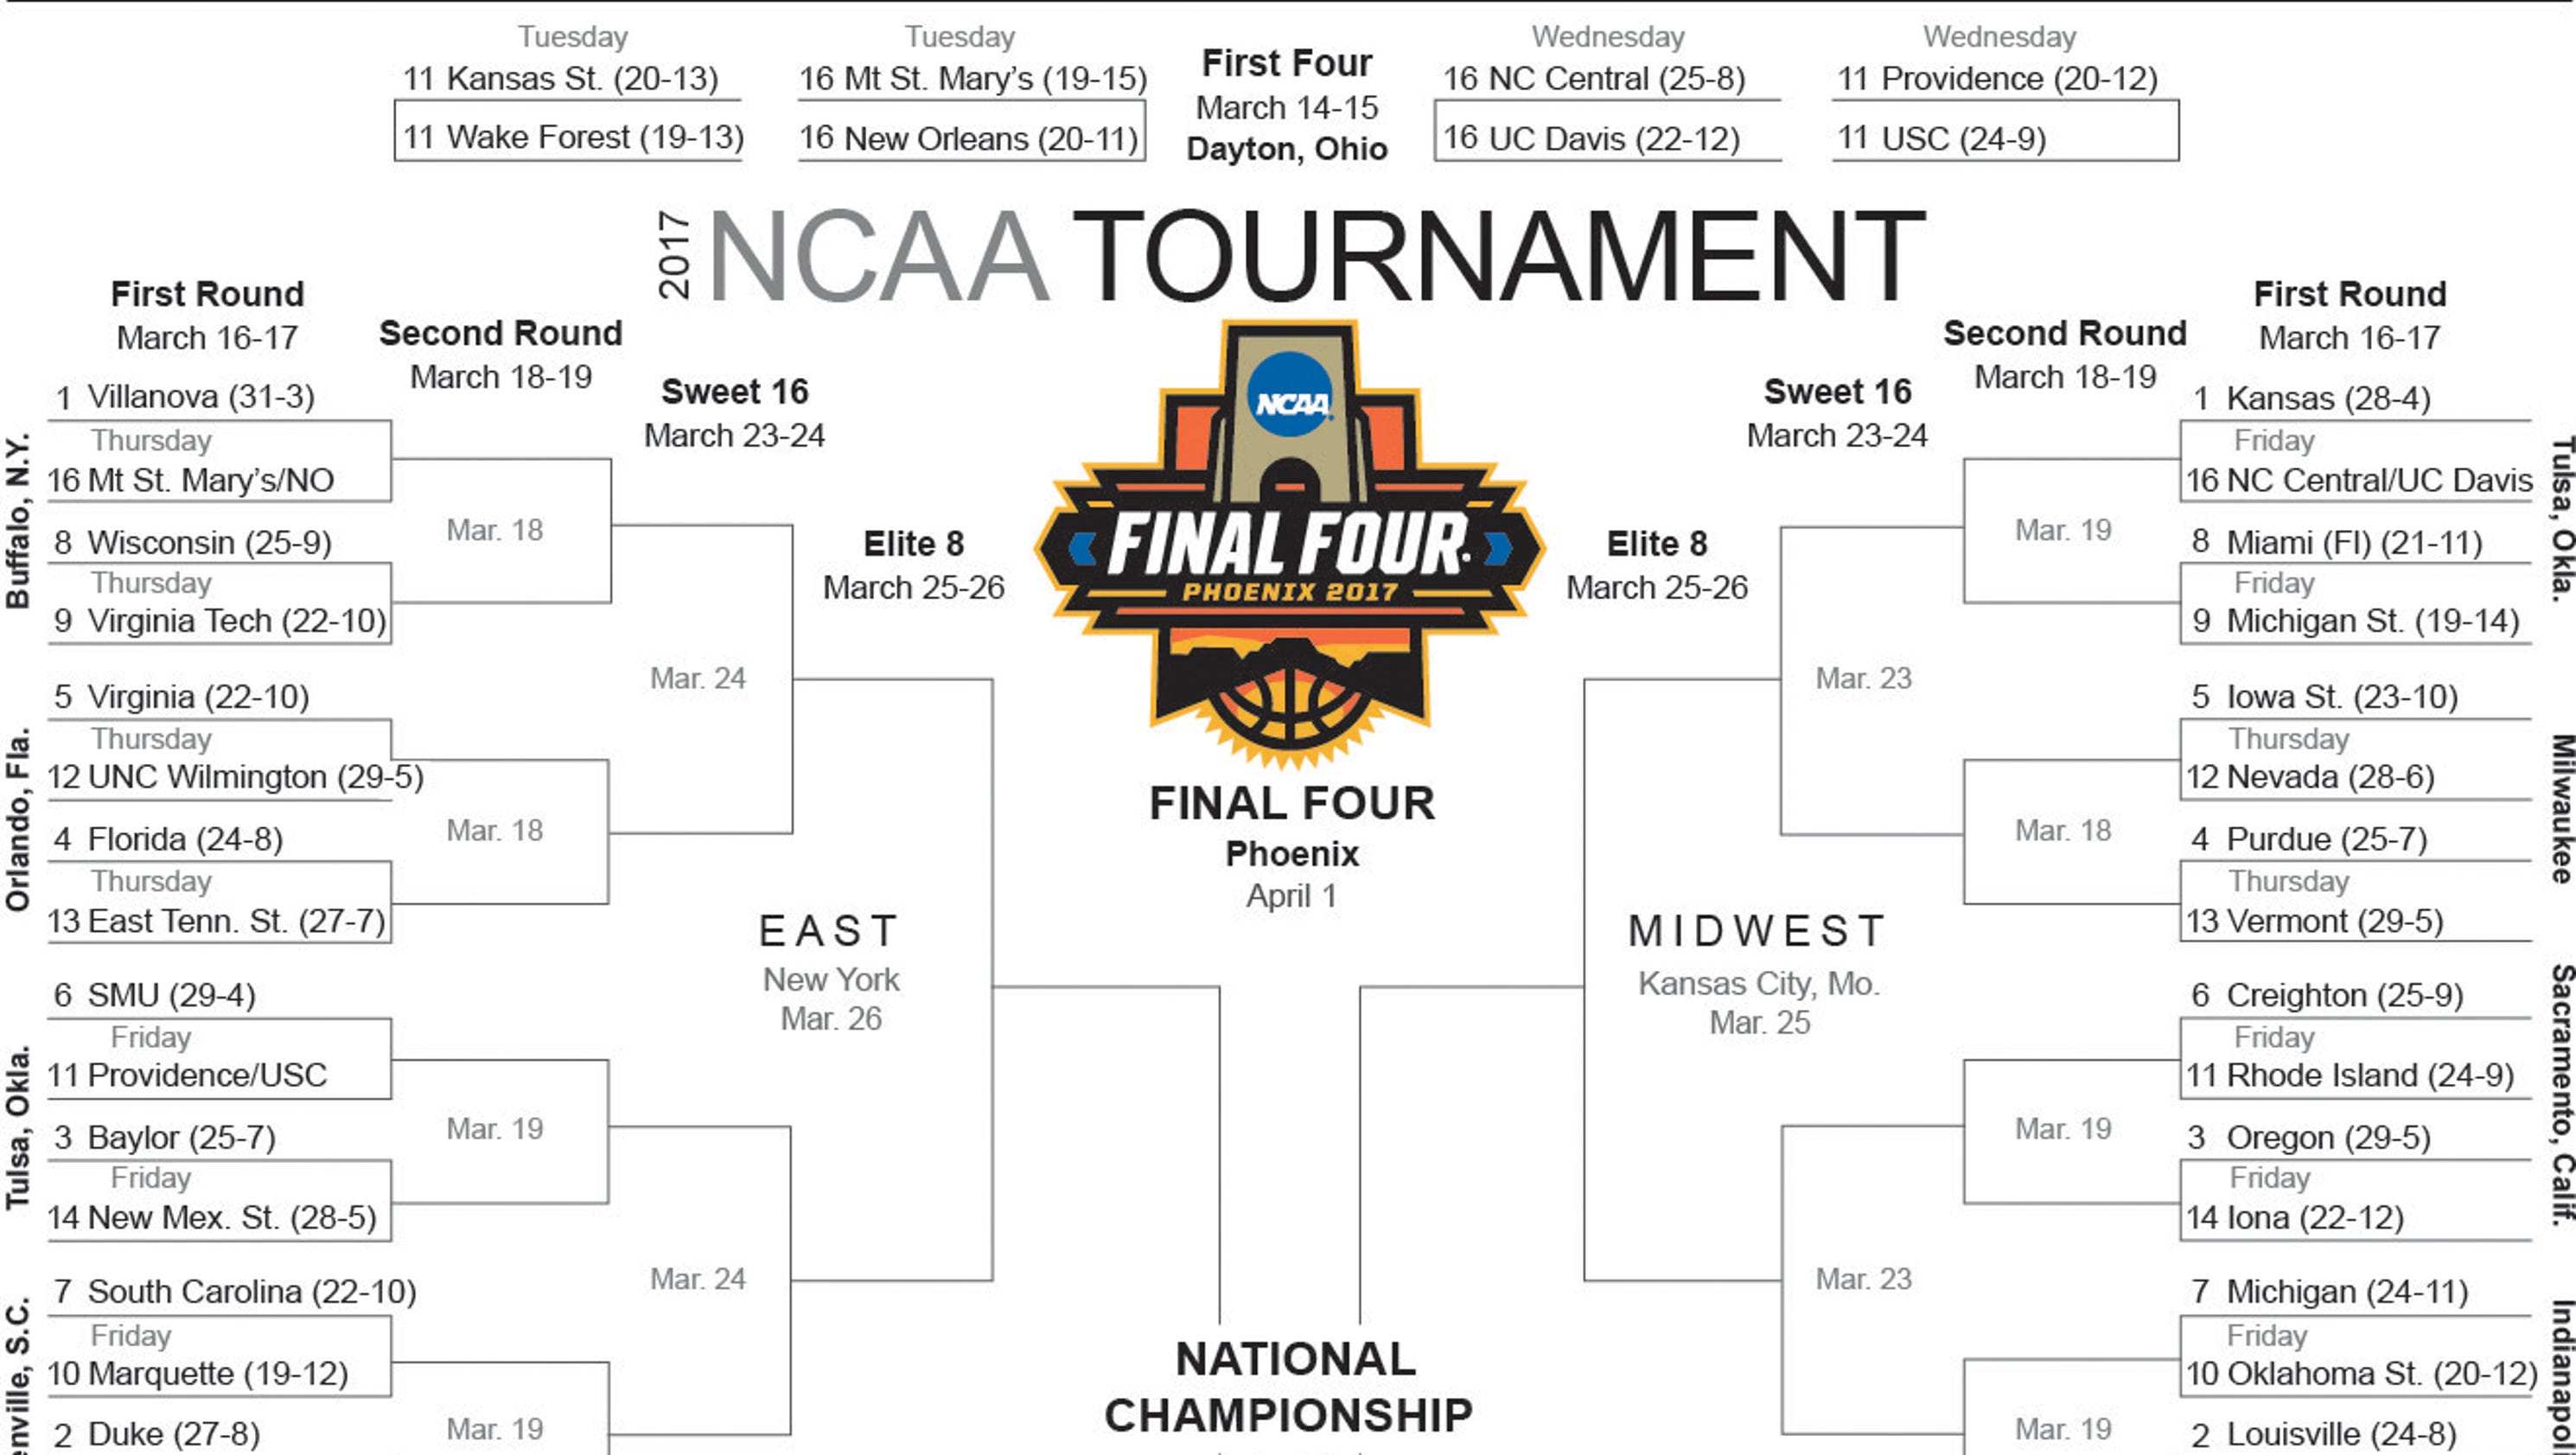 You don't have to limit bracketology to March Madness